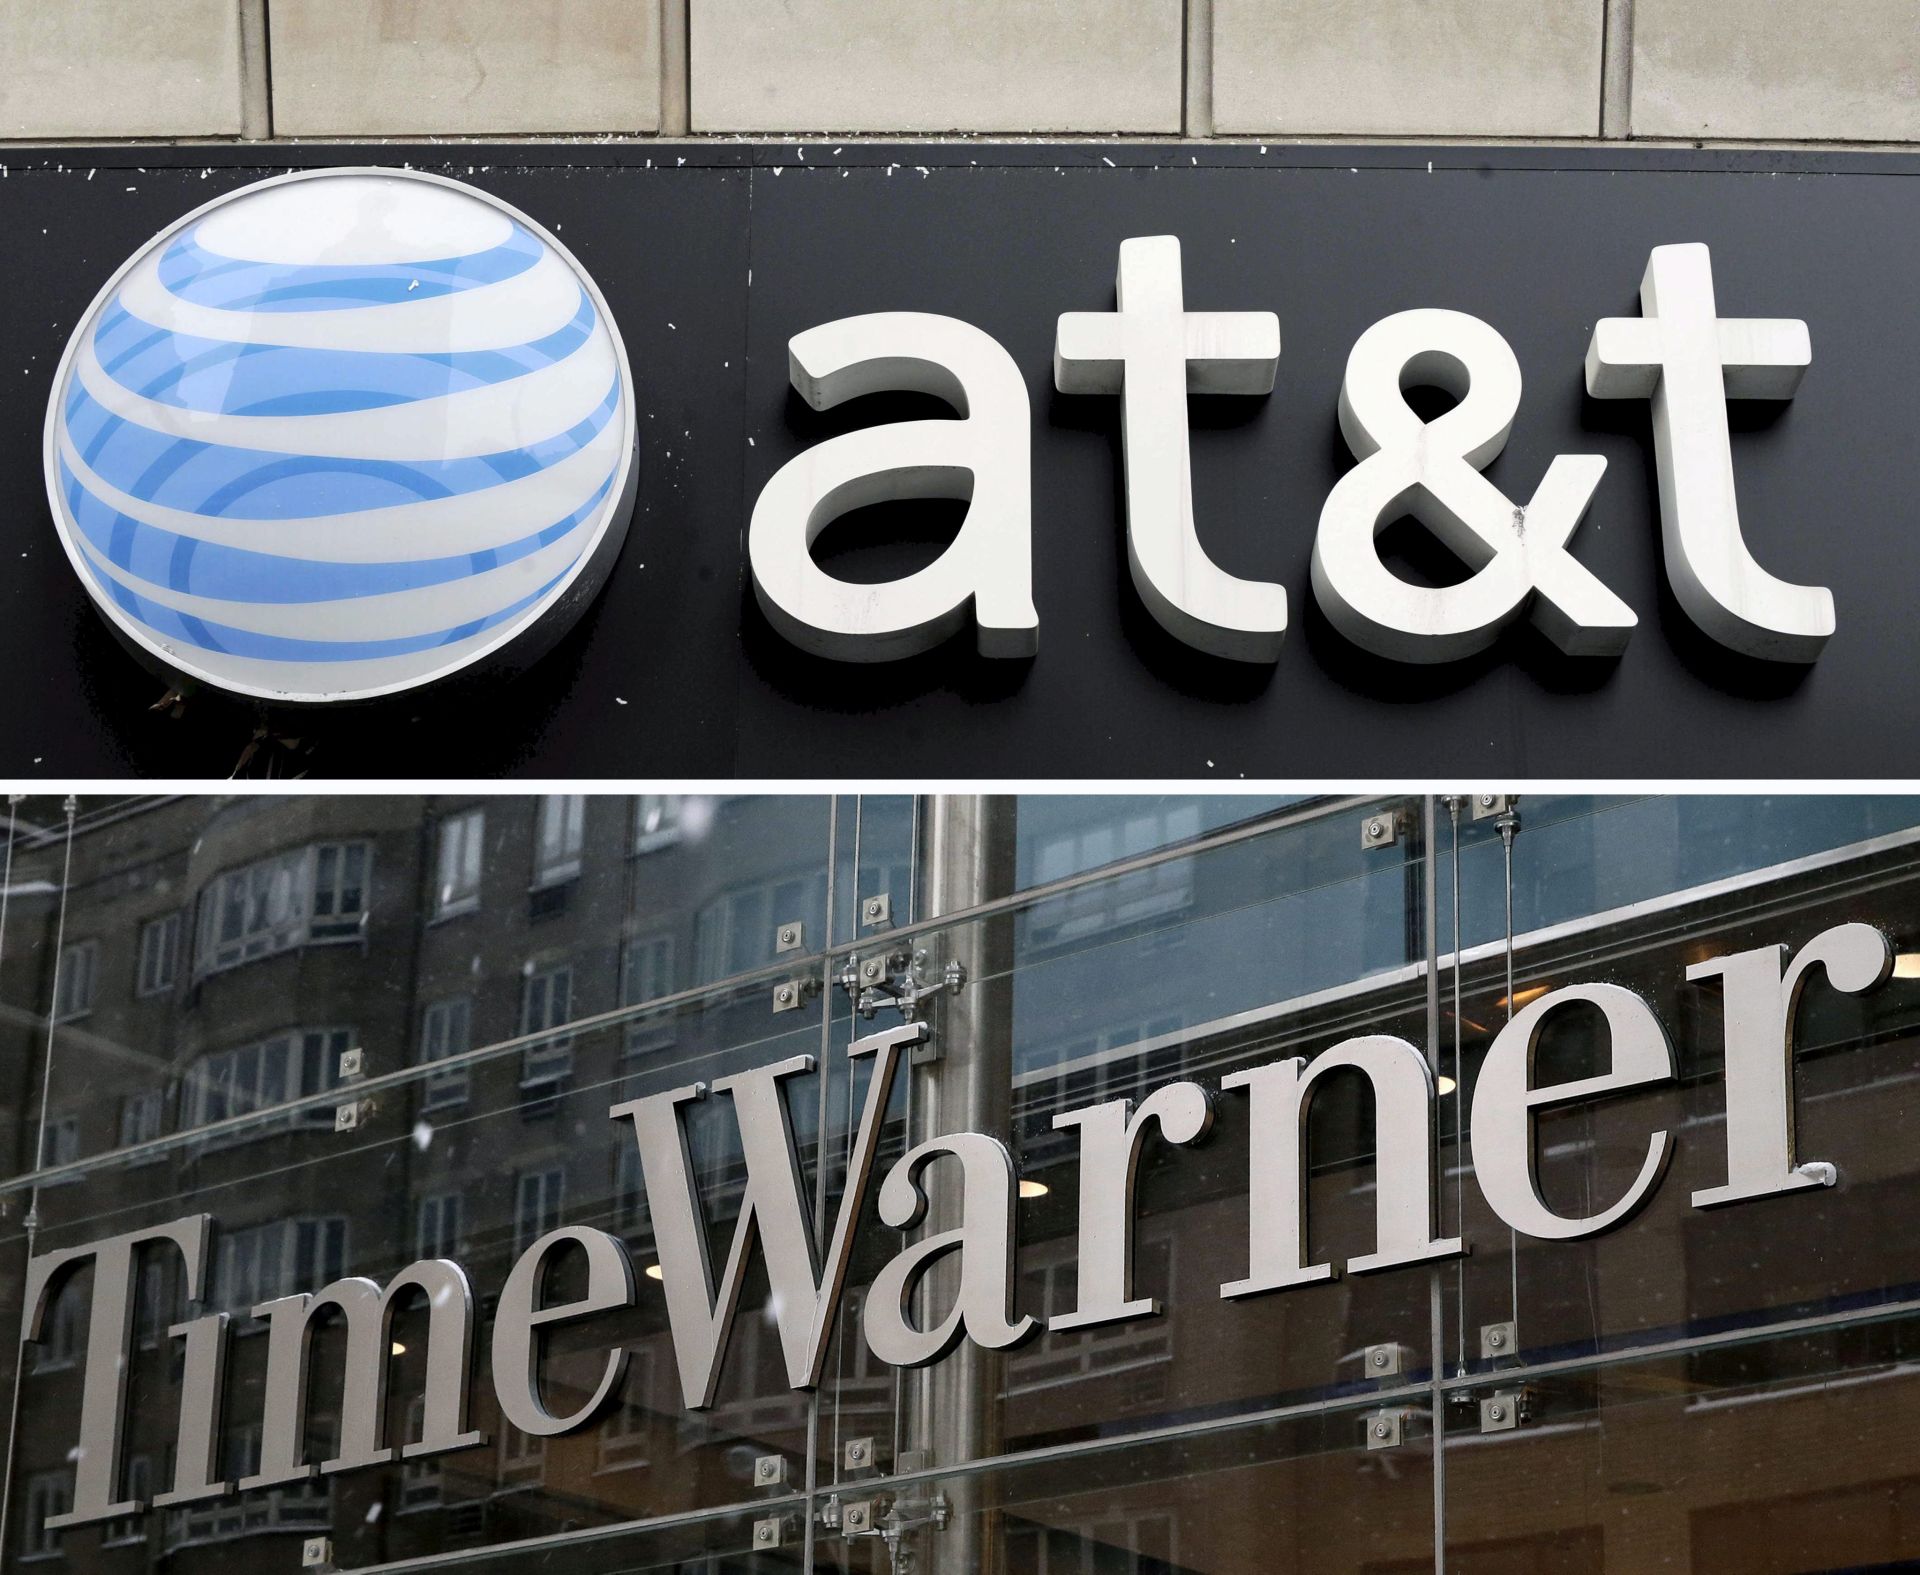 epa05598663 (FILE) A combo file picture made available on 23 October 2016 shows an AT&T store (top) in New York City, New York, USA, on 04 December 2008, and a view of the Time Warner Center (bottom) in New York City, New York, USA, on 13 February 2014. US telecommunications company AT&T Inc. announced on 22 October 2016, it reached an agreement to acquire multinational media and entertainment conglomerate Time Warner Inc. (TWI) for 85.4 billion US dollar (about 78.4 billion euro). AT&T will acquire Time Warner in cash and stock transactions valued at 107.50 US dollar per share, the company said. The deal, which needs to be approved by regulators, was said to be unanimously agreed by both companies' boards directors.  EPA/JUSTIN LANE/JASON SZENES